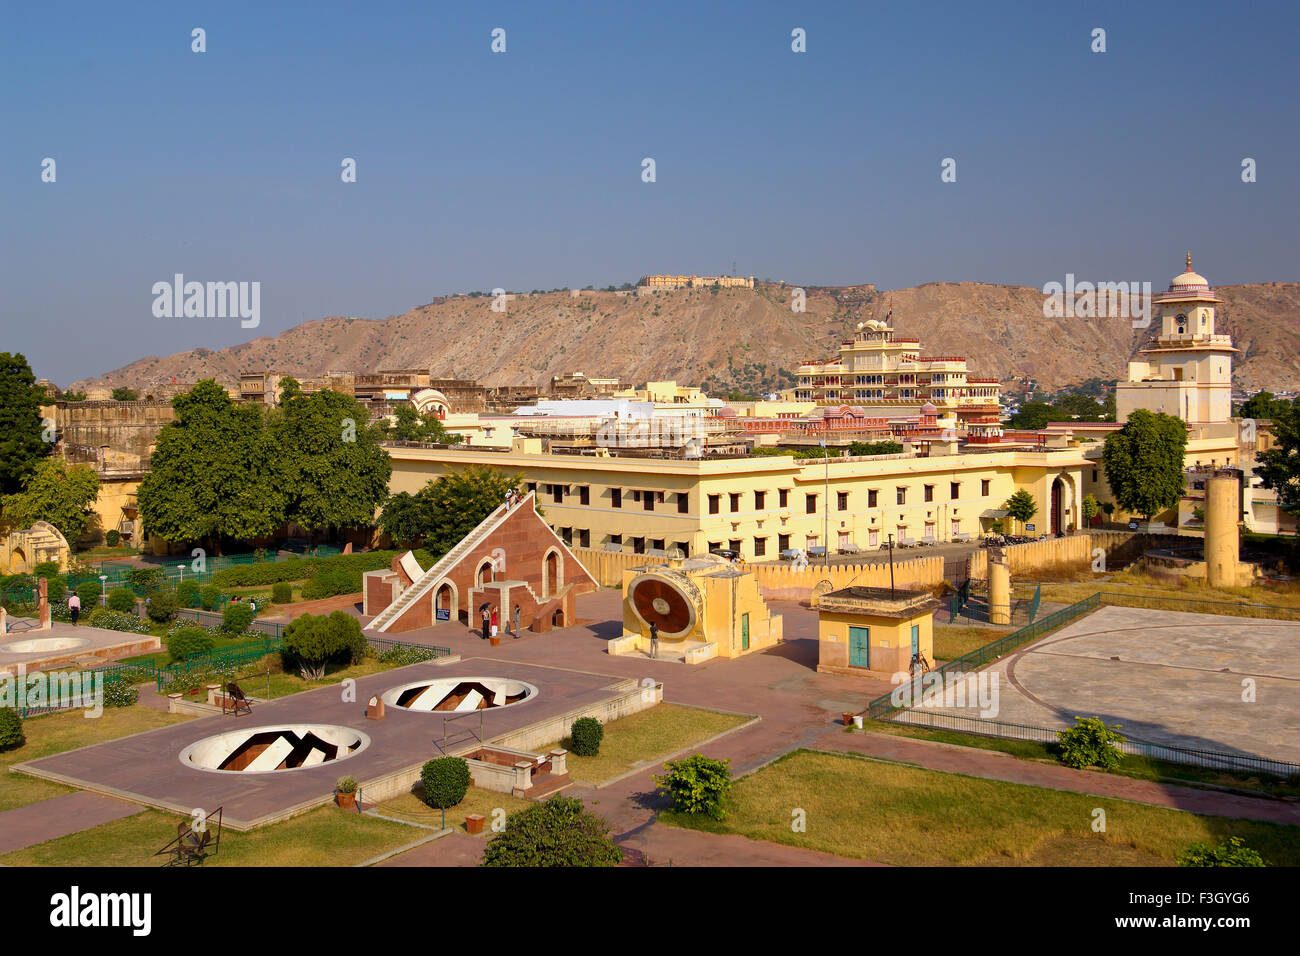 Vista aerea di Jantar Mantar Observatory con il City Place in background ; Jaipur ; Rajasthan ; India Foto Stock